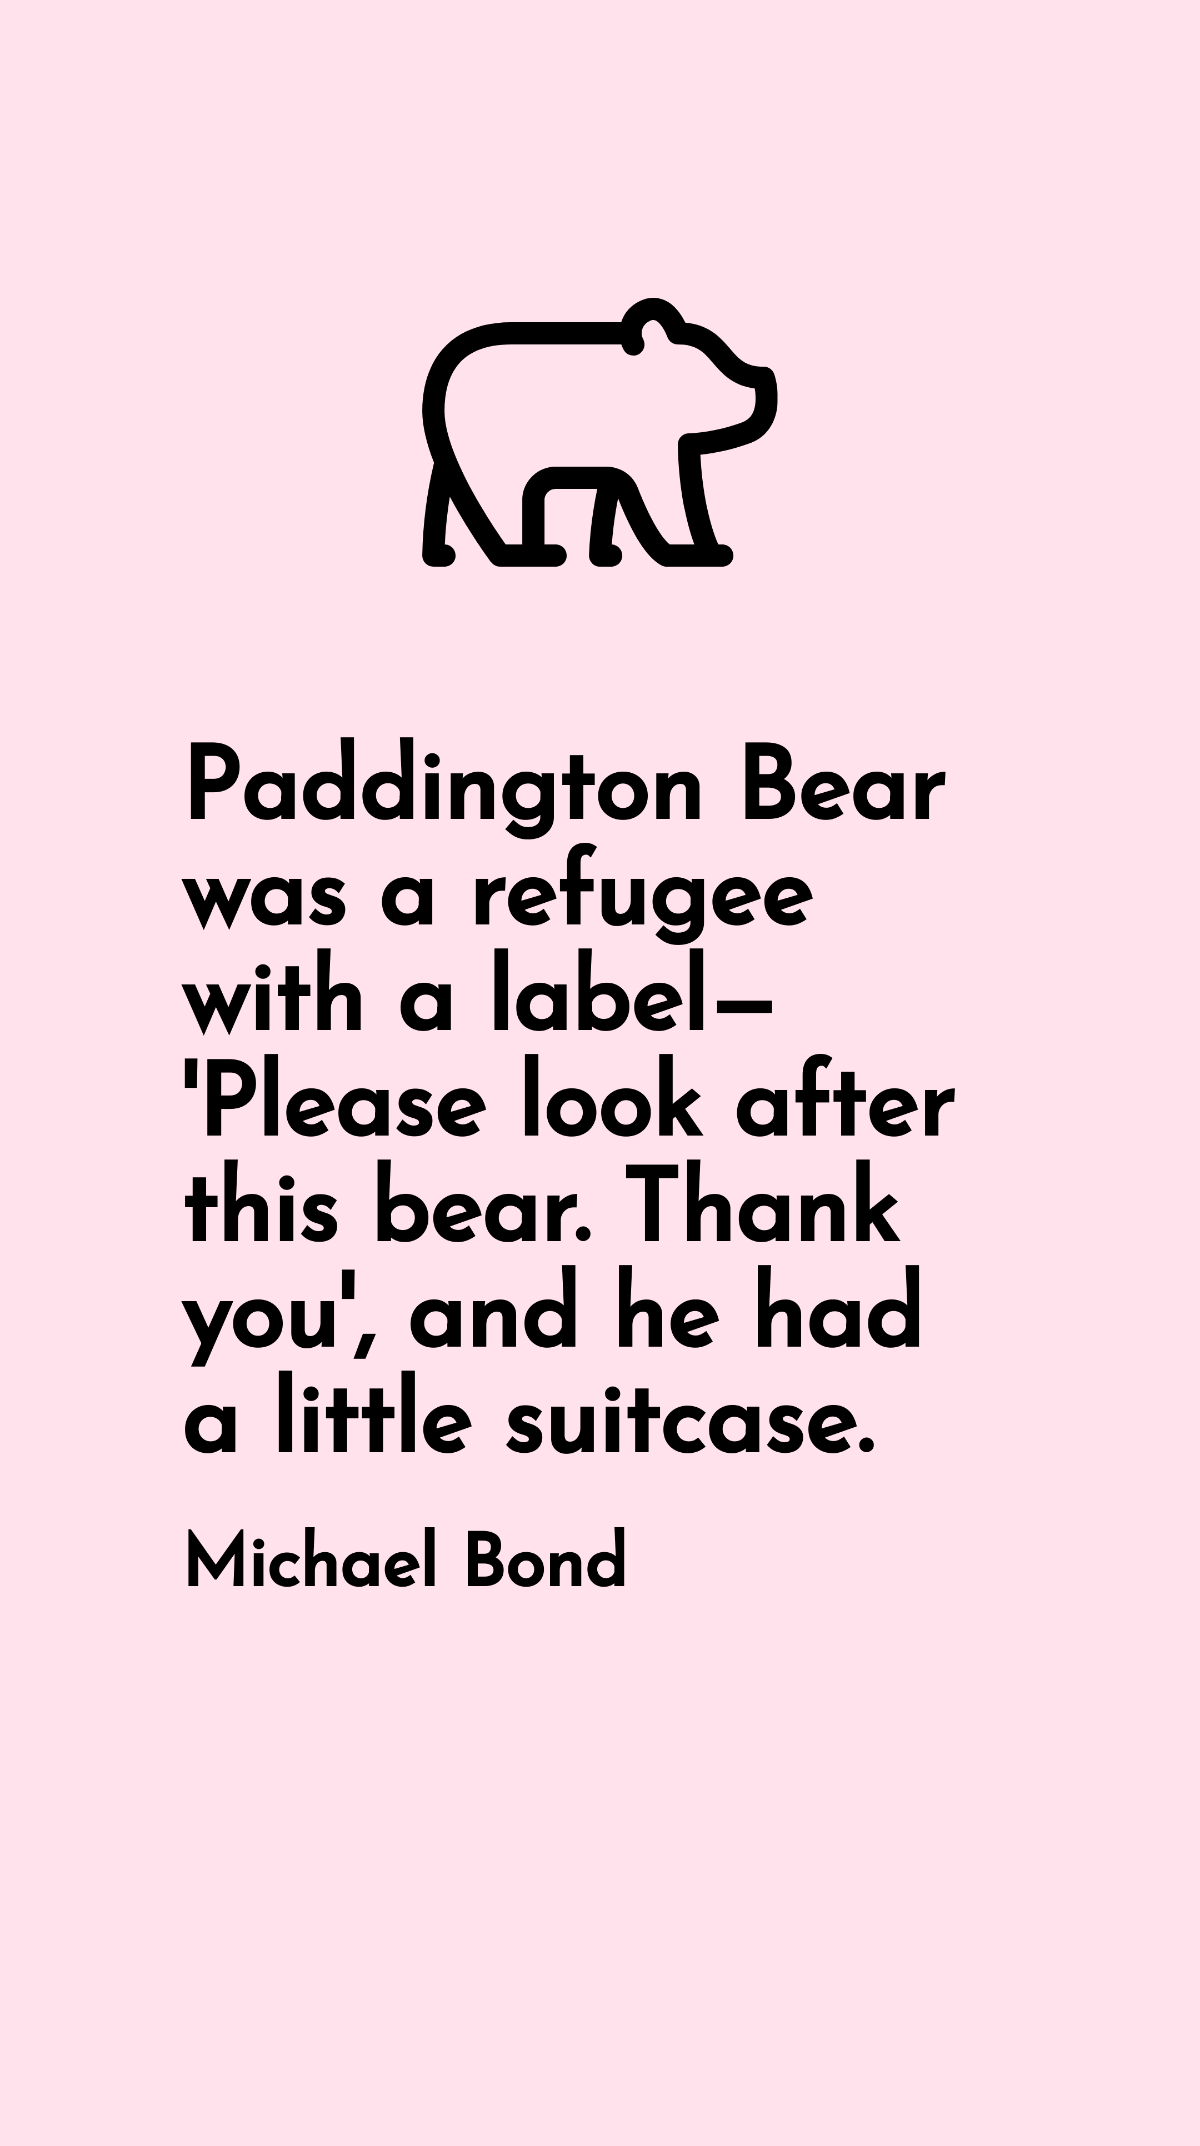 Free Michael Bond - Paddington Bear was a refugee with a label - 'Please look after this bear. Thank you', and he had a little suitcase. Template